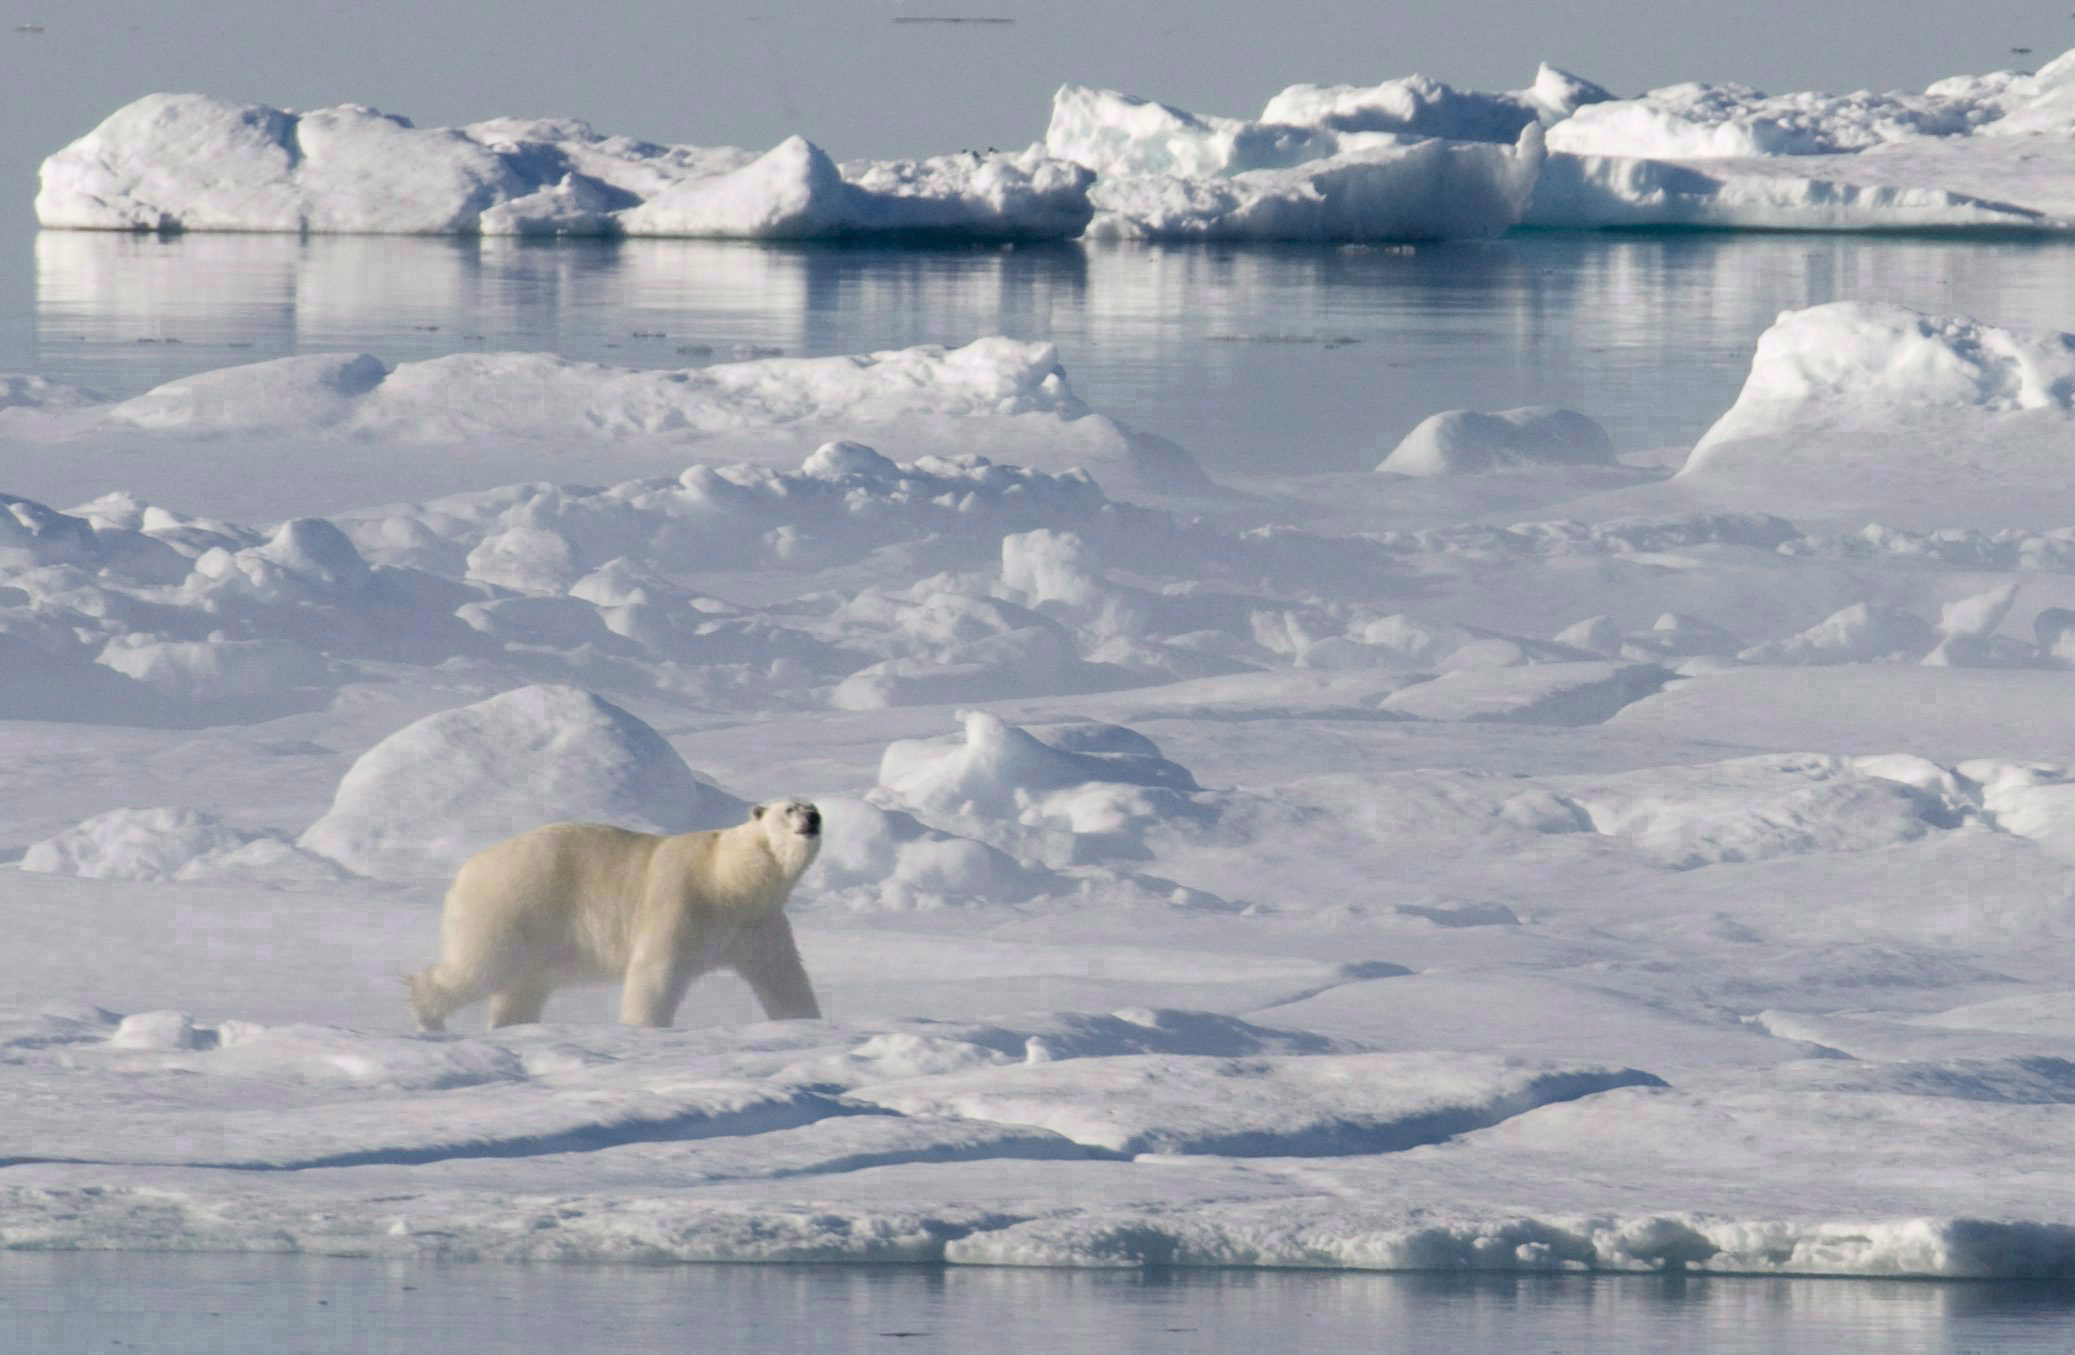 Arctic Research: Carhartts, Polar Bears, and Duct Tape - Science Friday